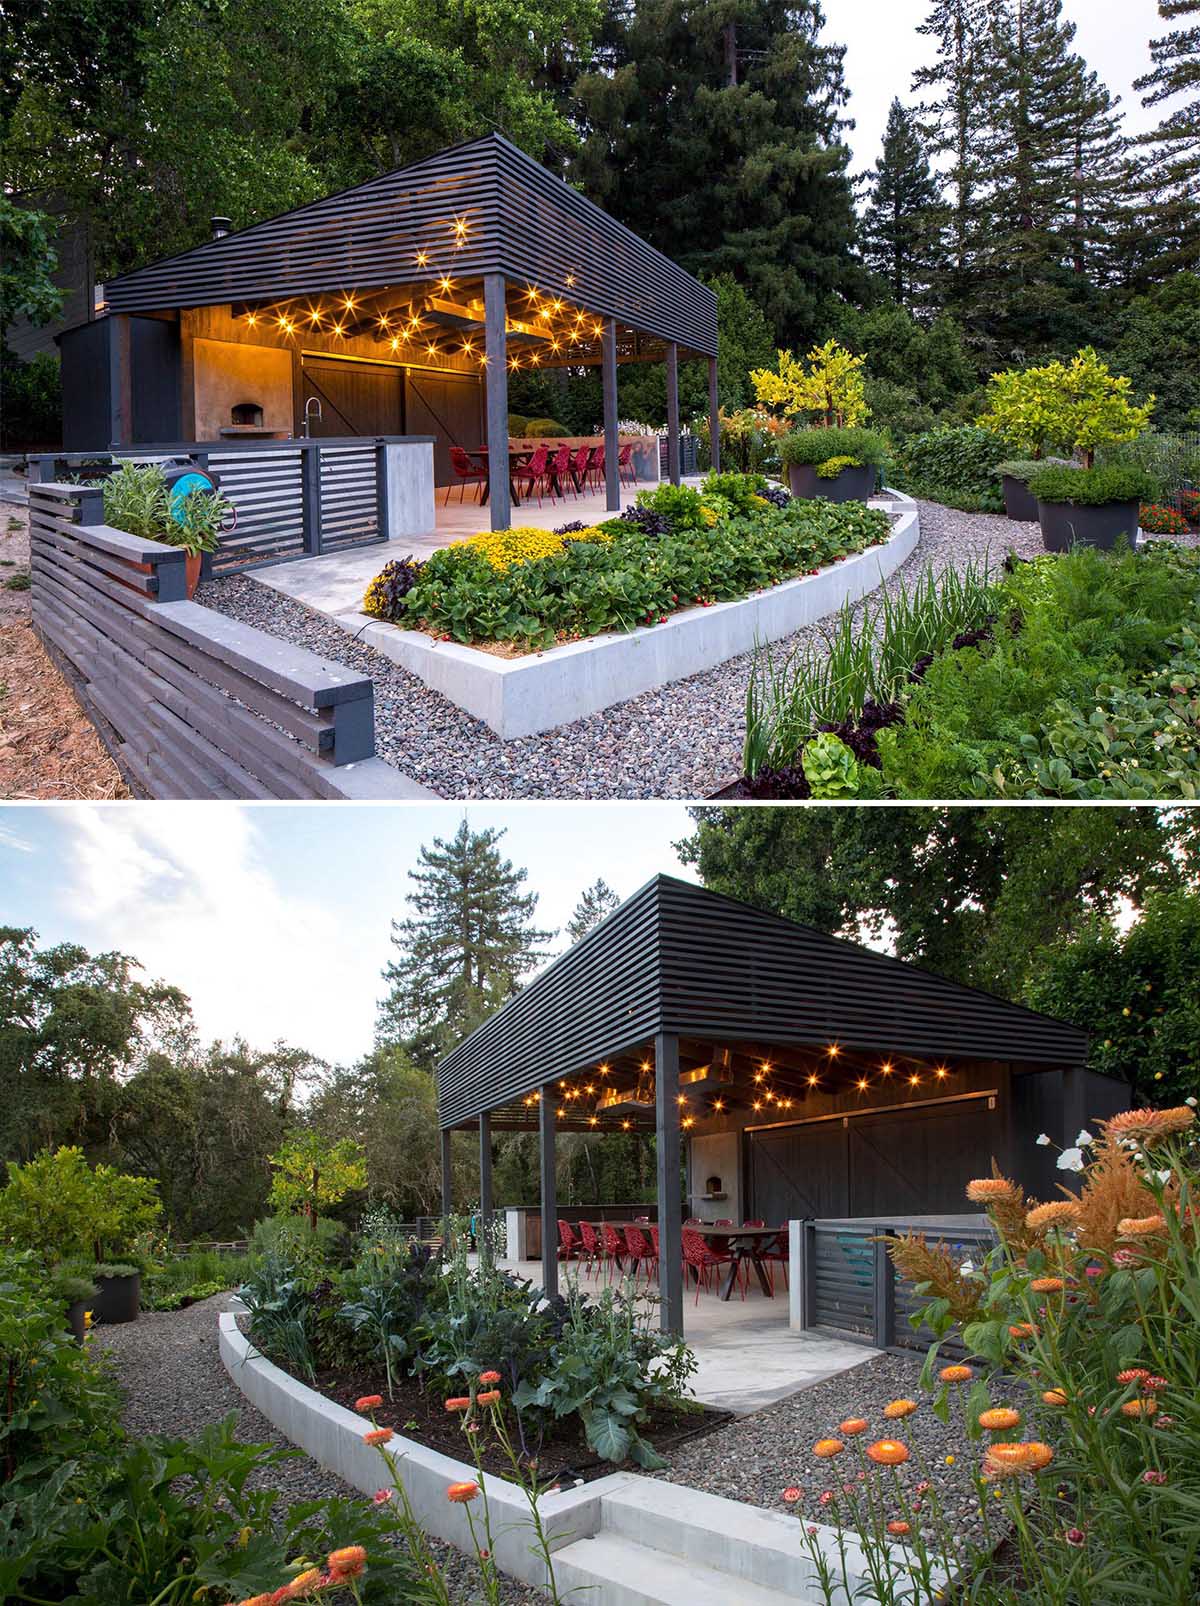 A modern garden with an covered outdoor dining area and terraced built-in planters made from concrete.